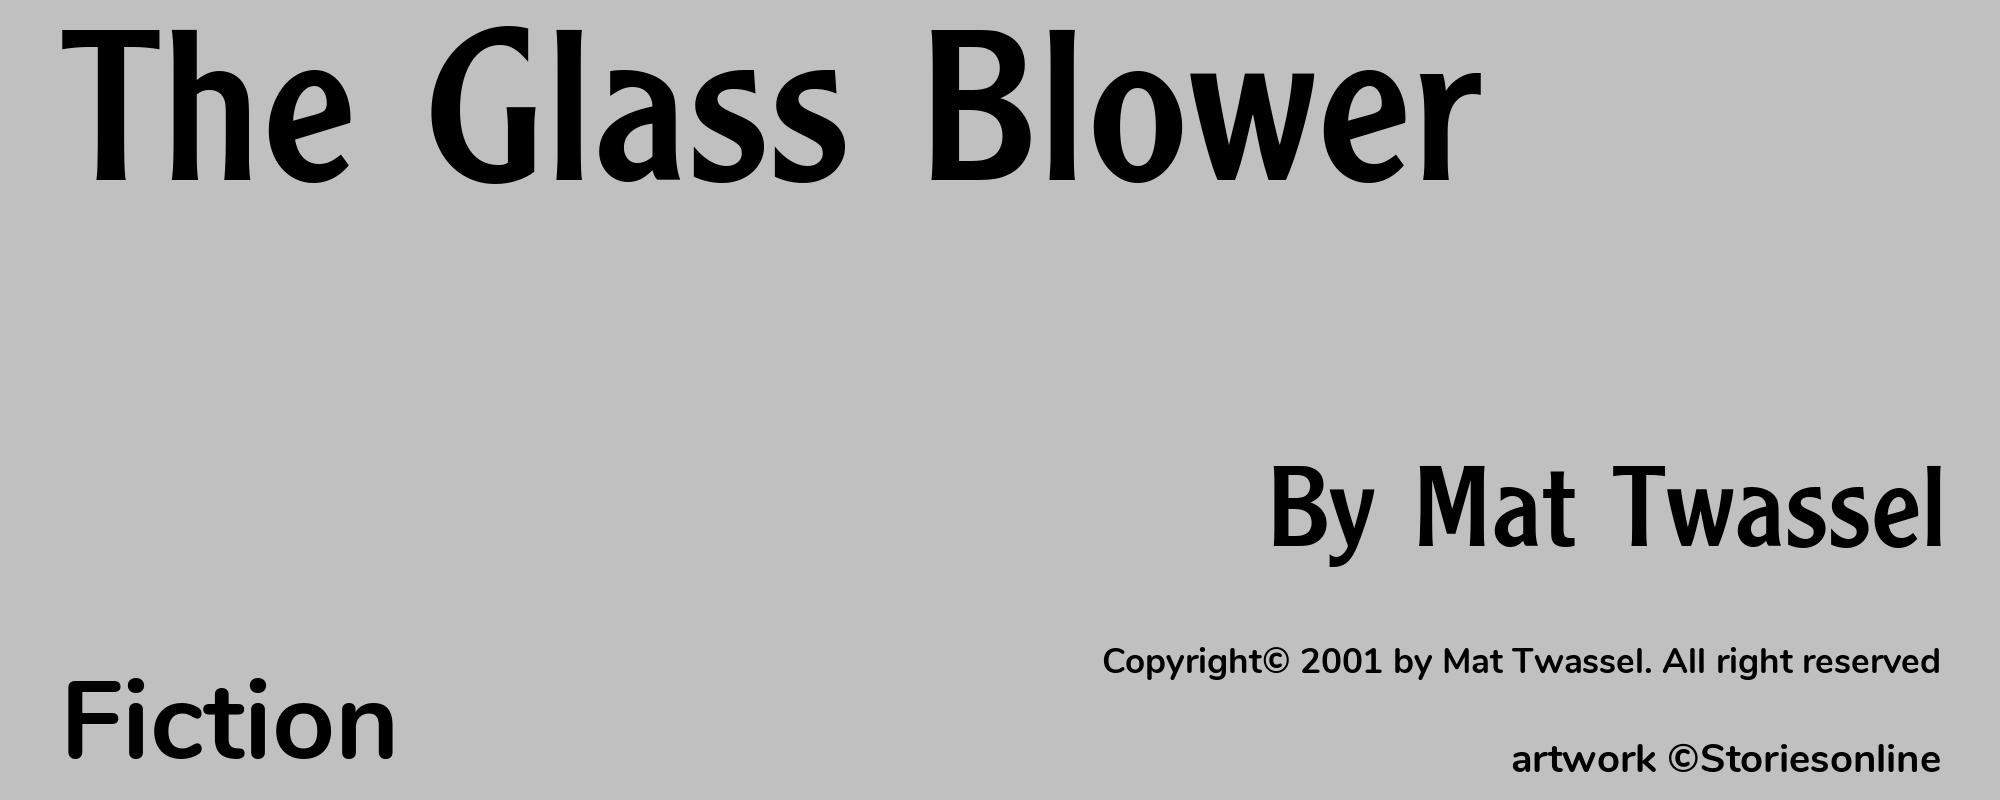 The Glass Blower - Cover